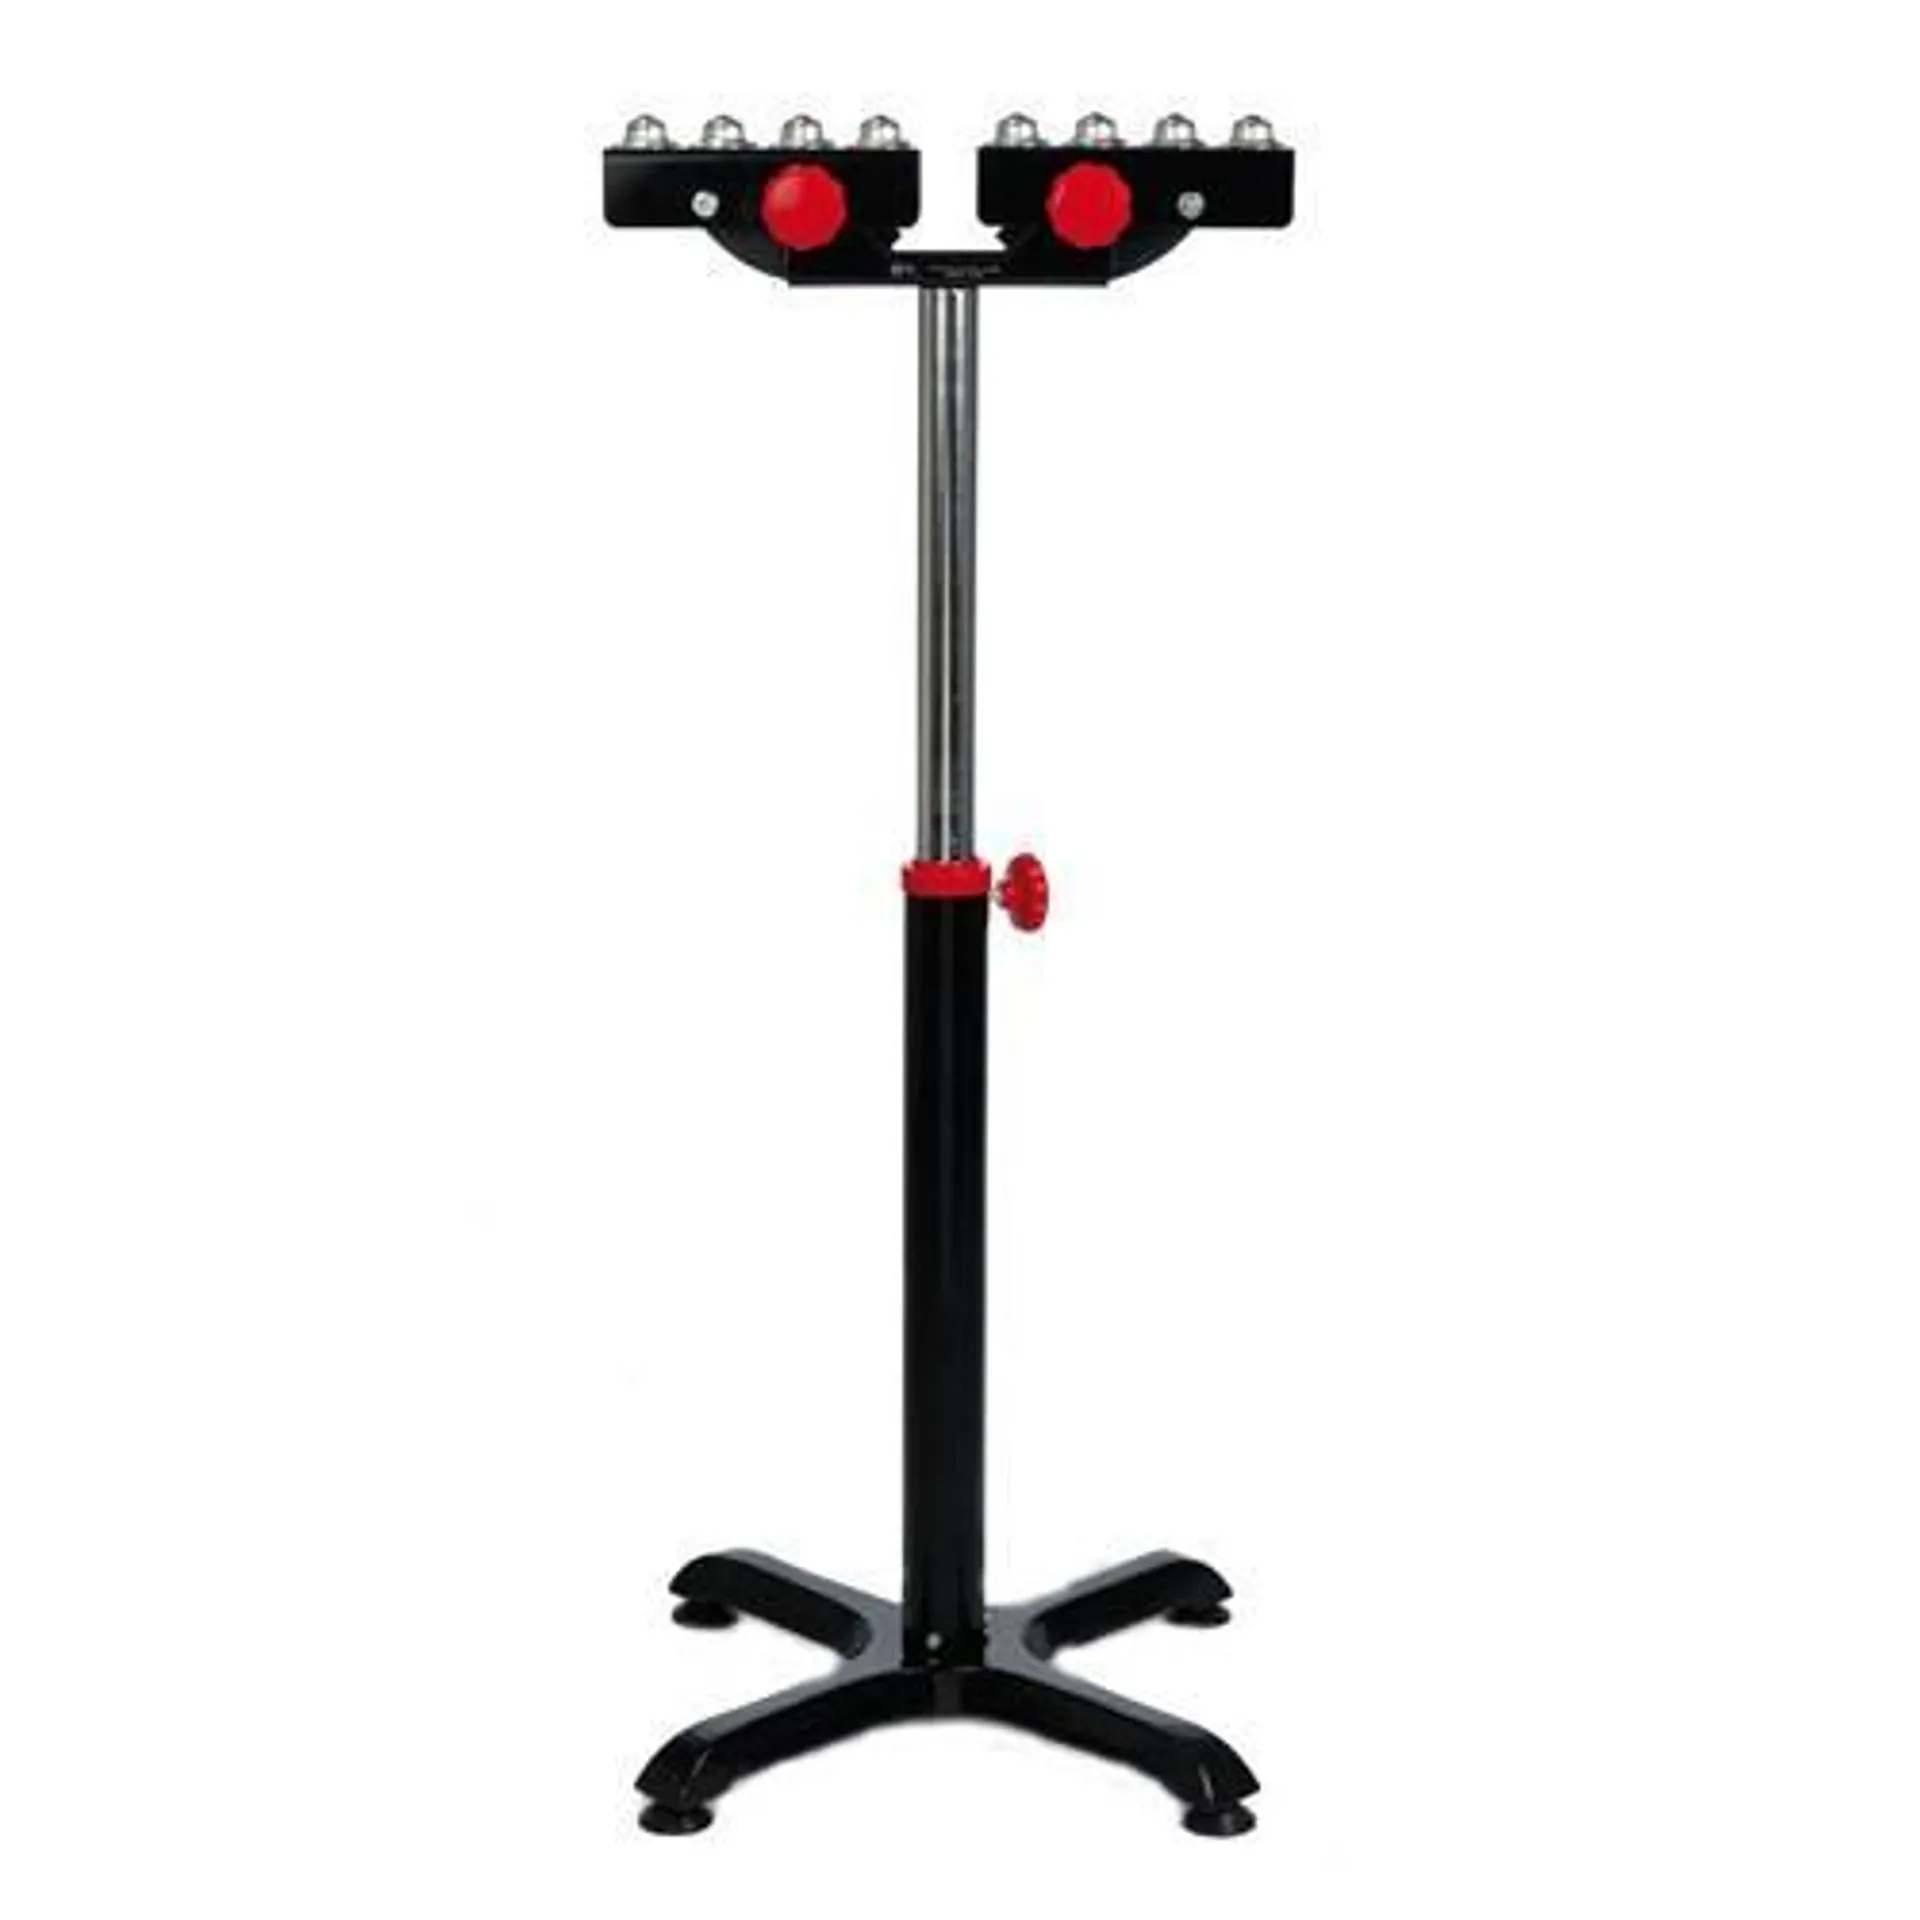 01383 Adjustable V-Type Roller Ball Stand - 8 Rollers 100Kg Capacity